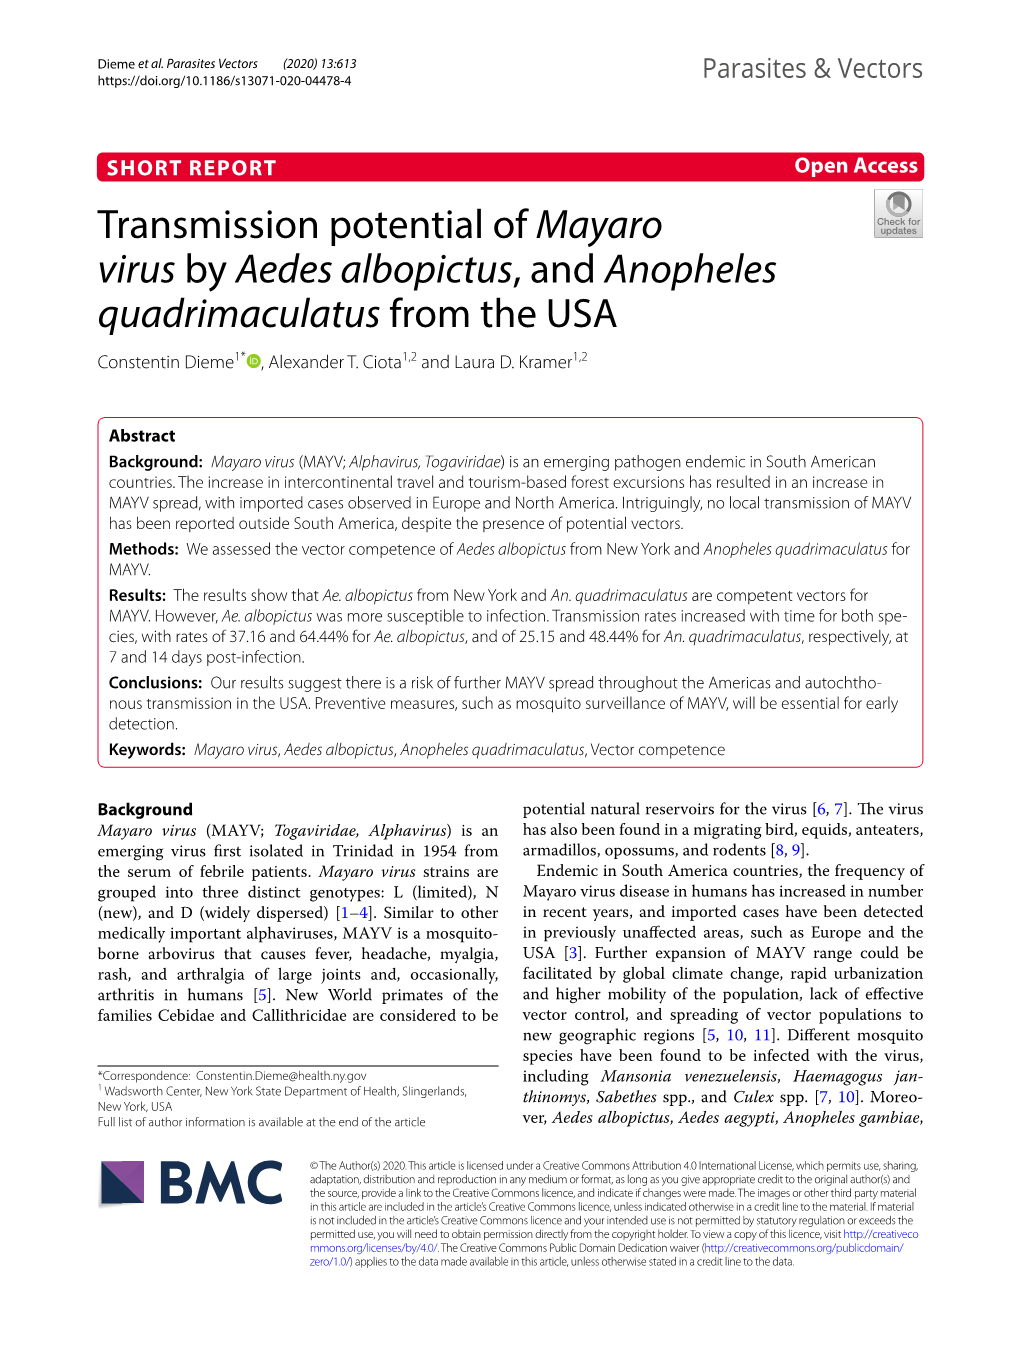 Transmission Potential of Mayaro Virus by Aedes Albopictus, and Anopheles Quadrimaculatus from the USA Constentin Dieme1* , Alexander T